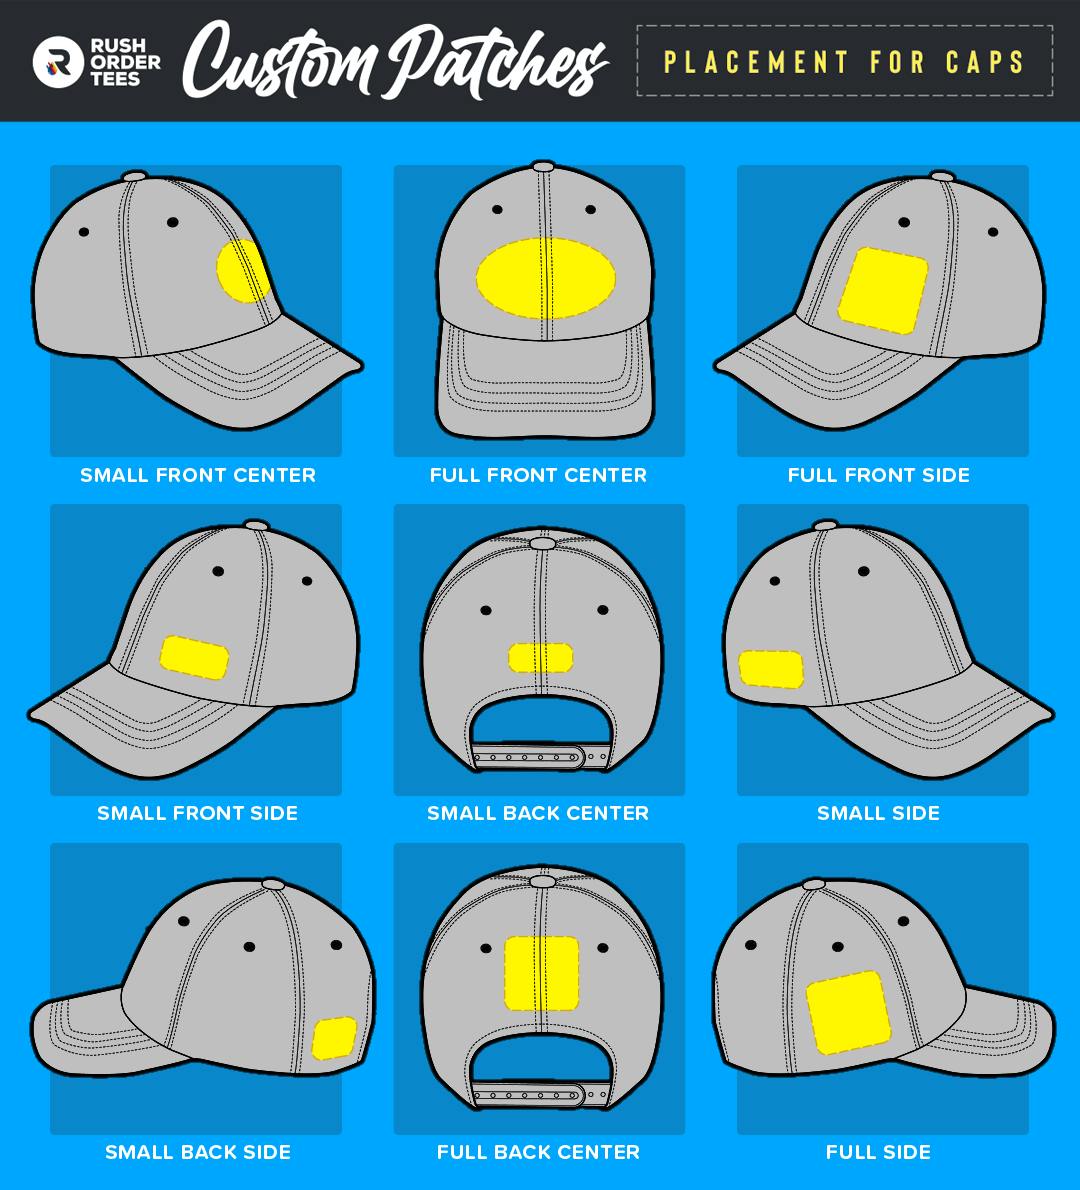 Example placement locations of patches on hats.